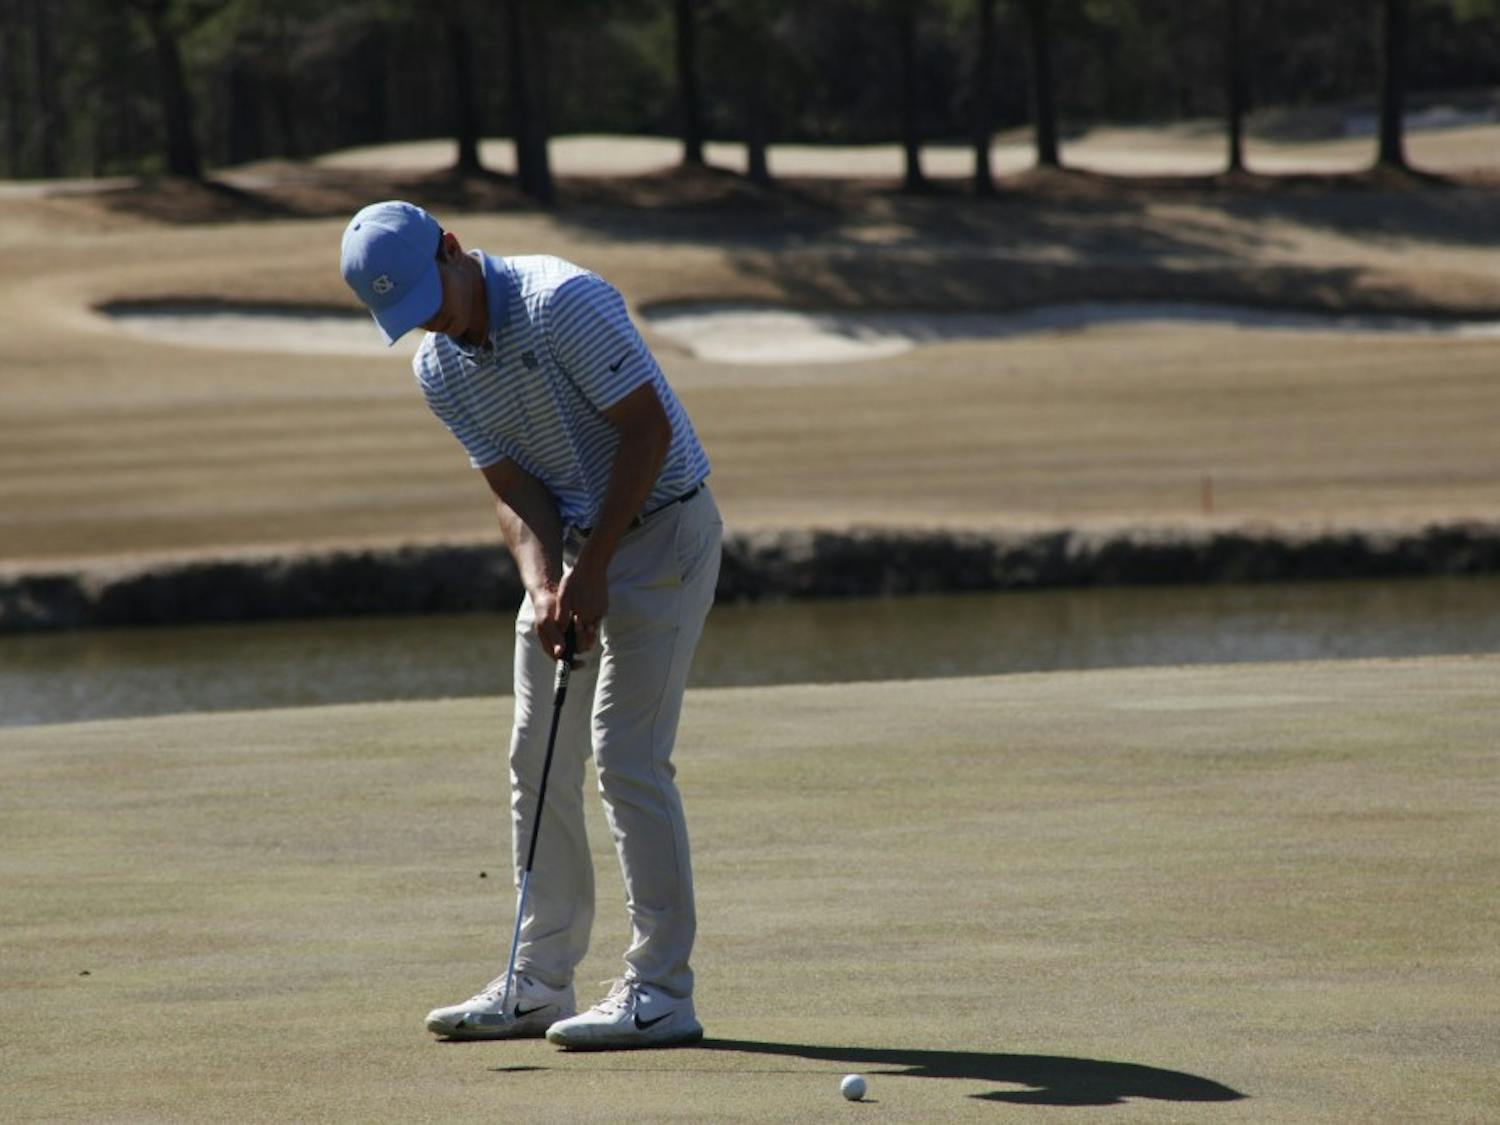 First-year Dougie Ergood making a putt during UNC's win at the second day of the Tar Heel Intercollegiate hosted at Finley Golf Course on Sunday, March 24, 2019.